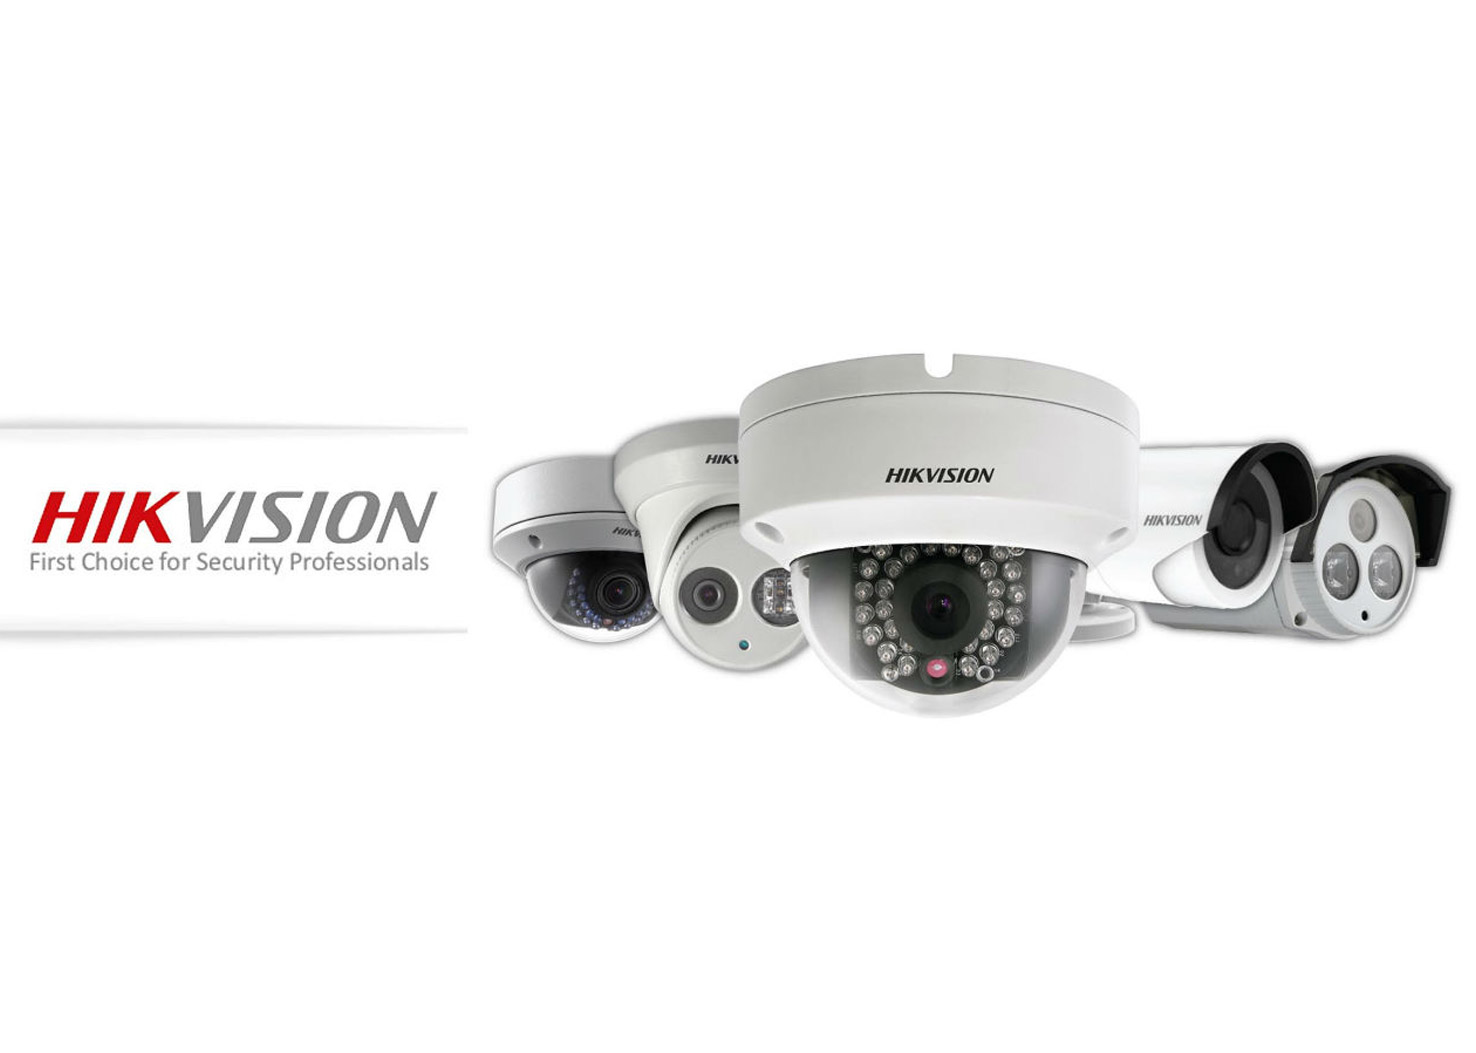 hikvision banner page a